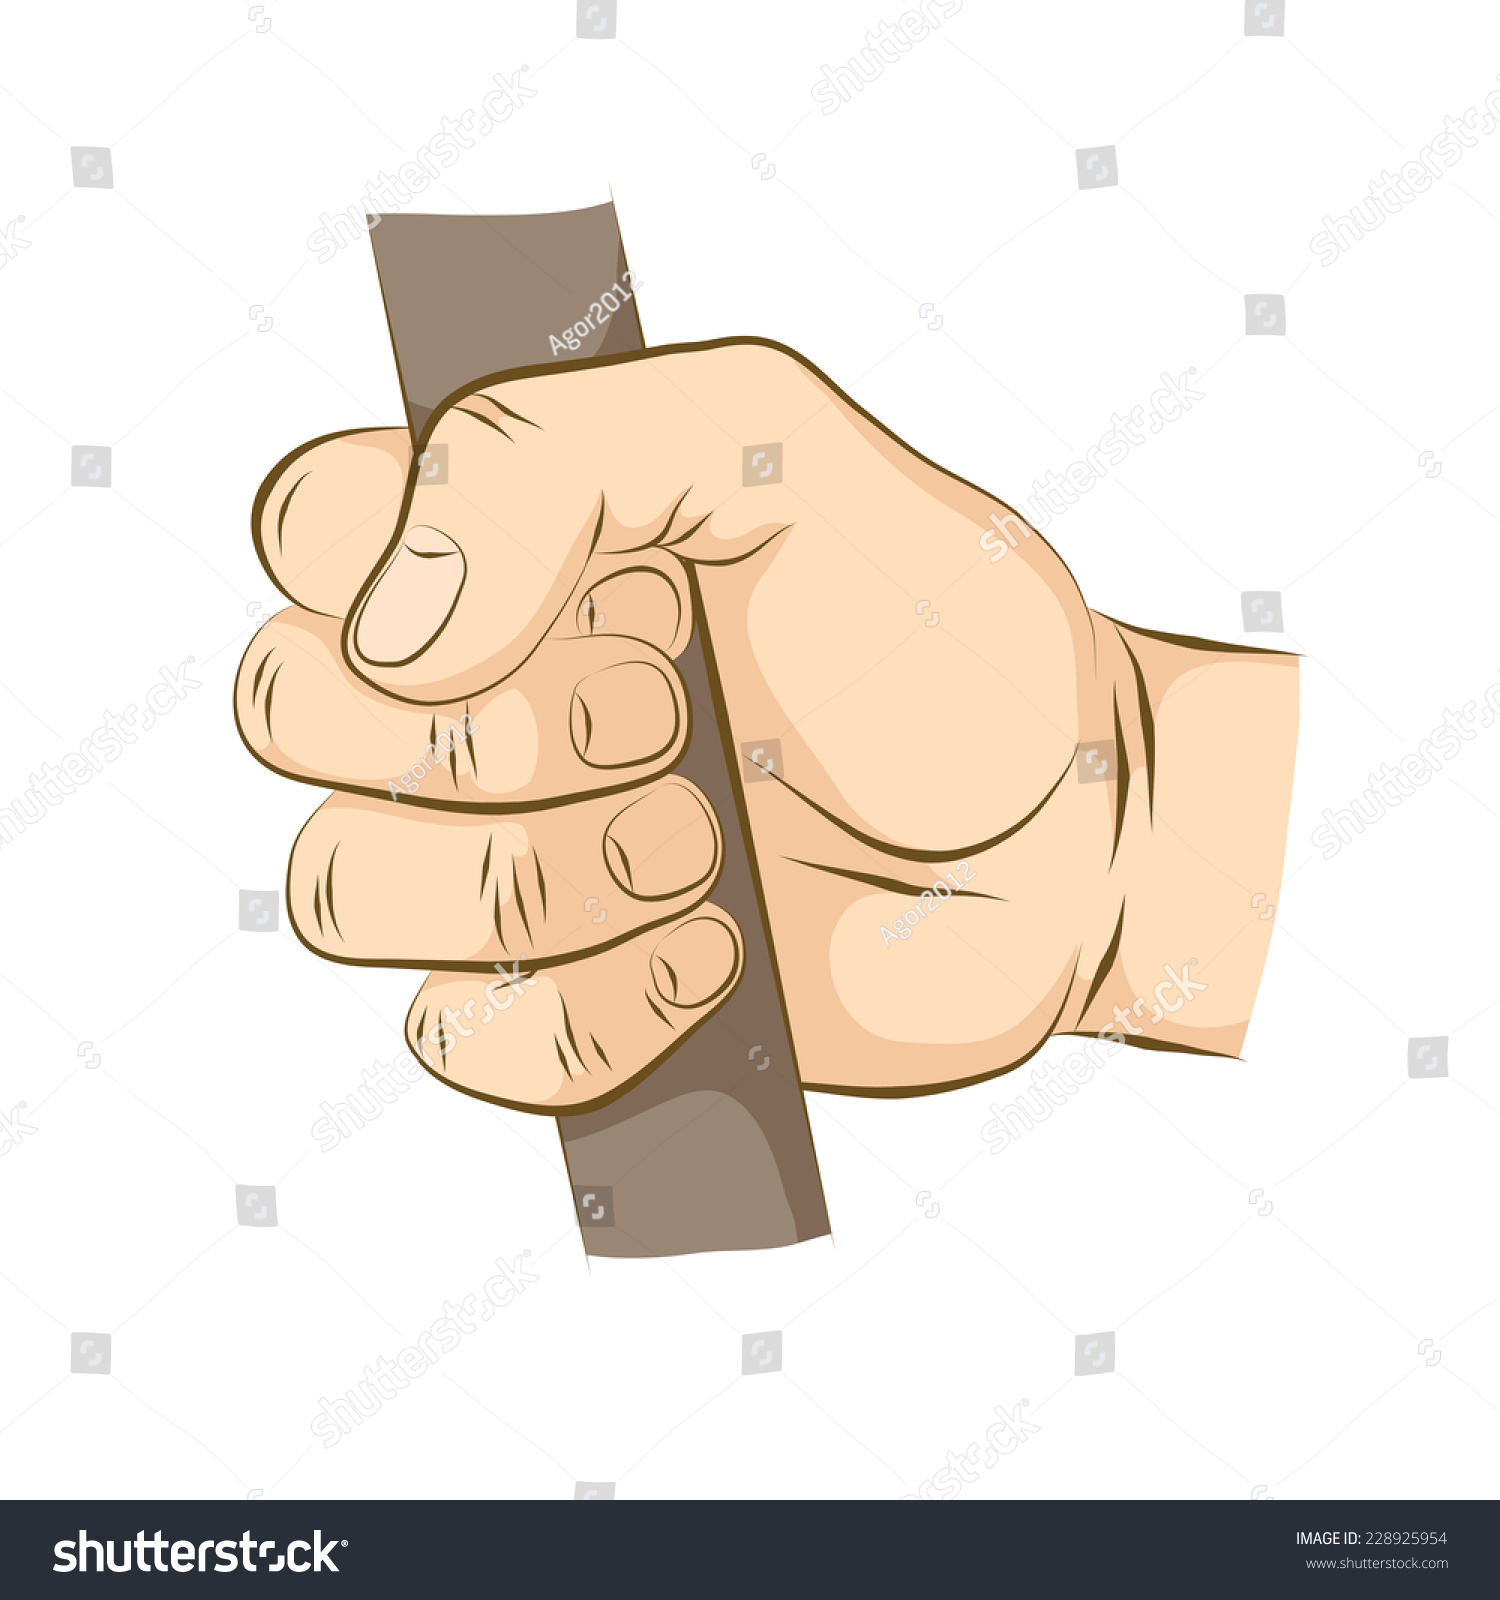 The Hand Holds Some Tool Or Stick - Realistic Vector Image. Stick